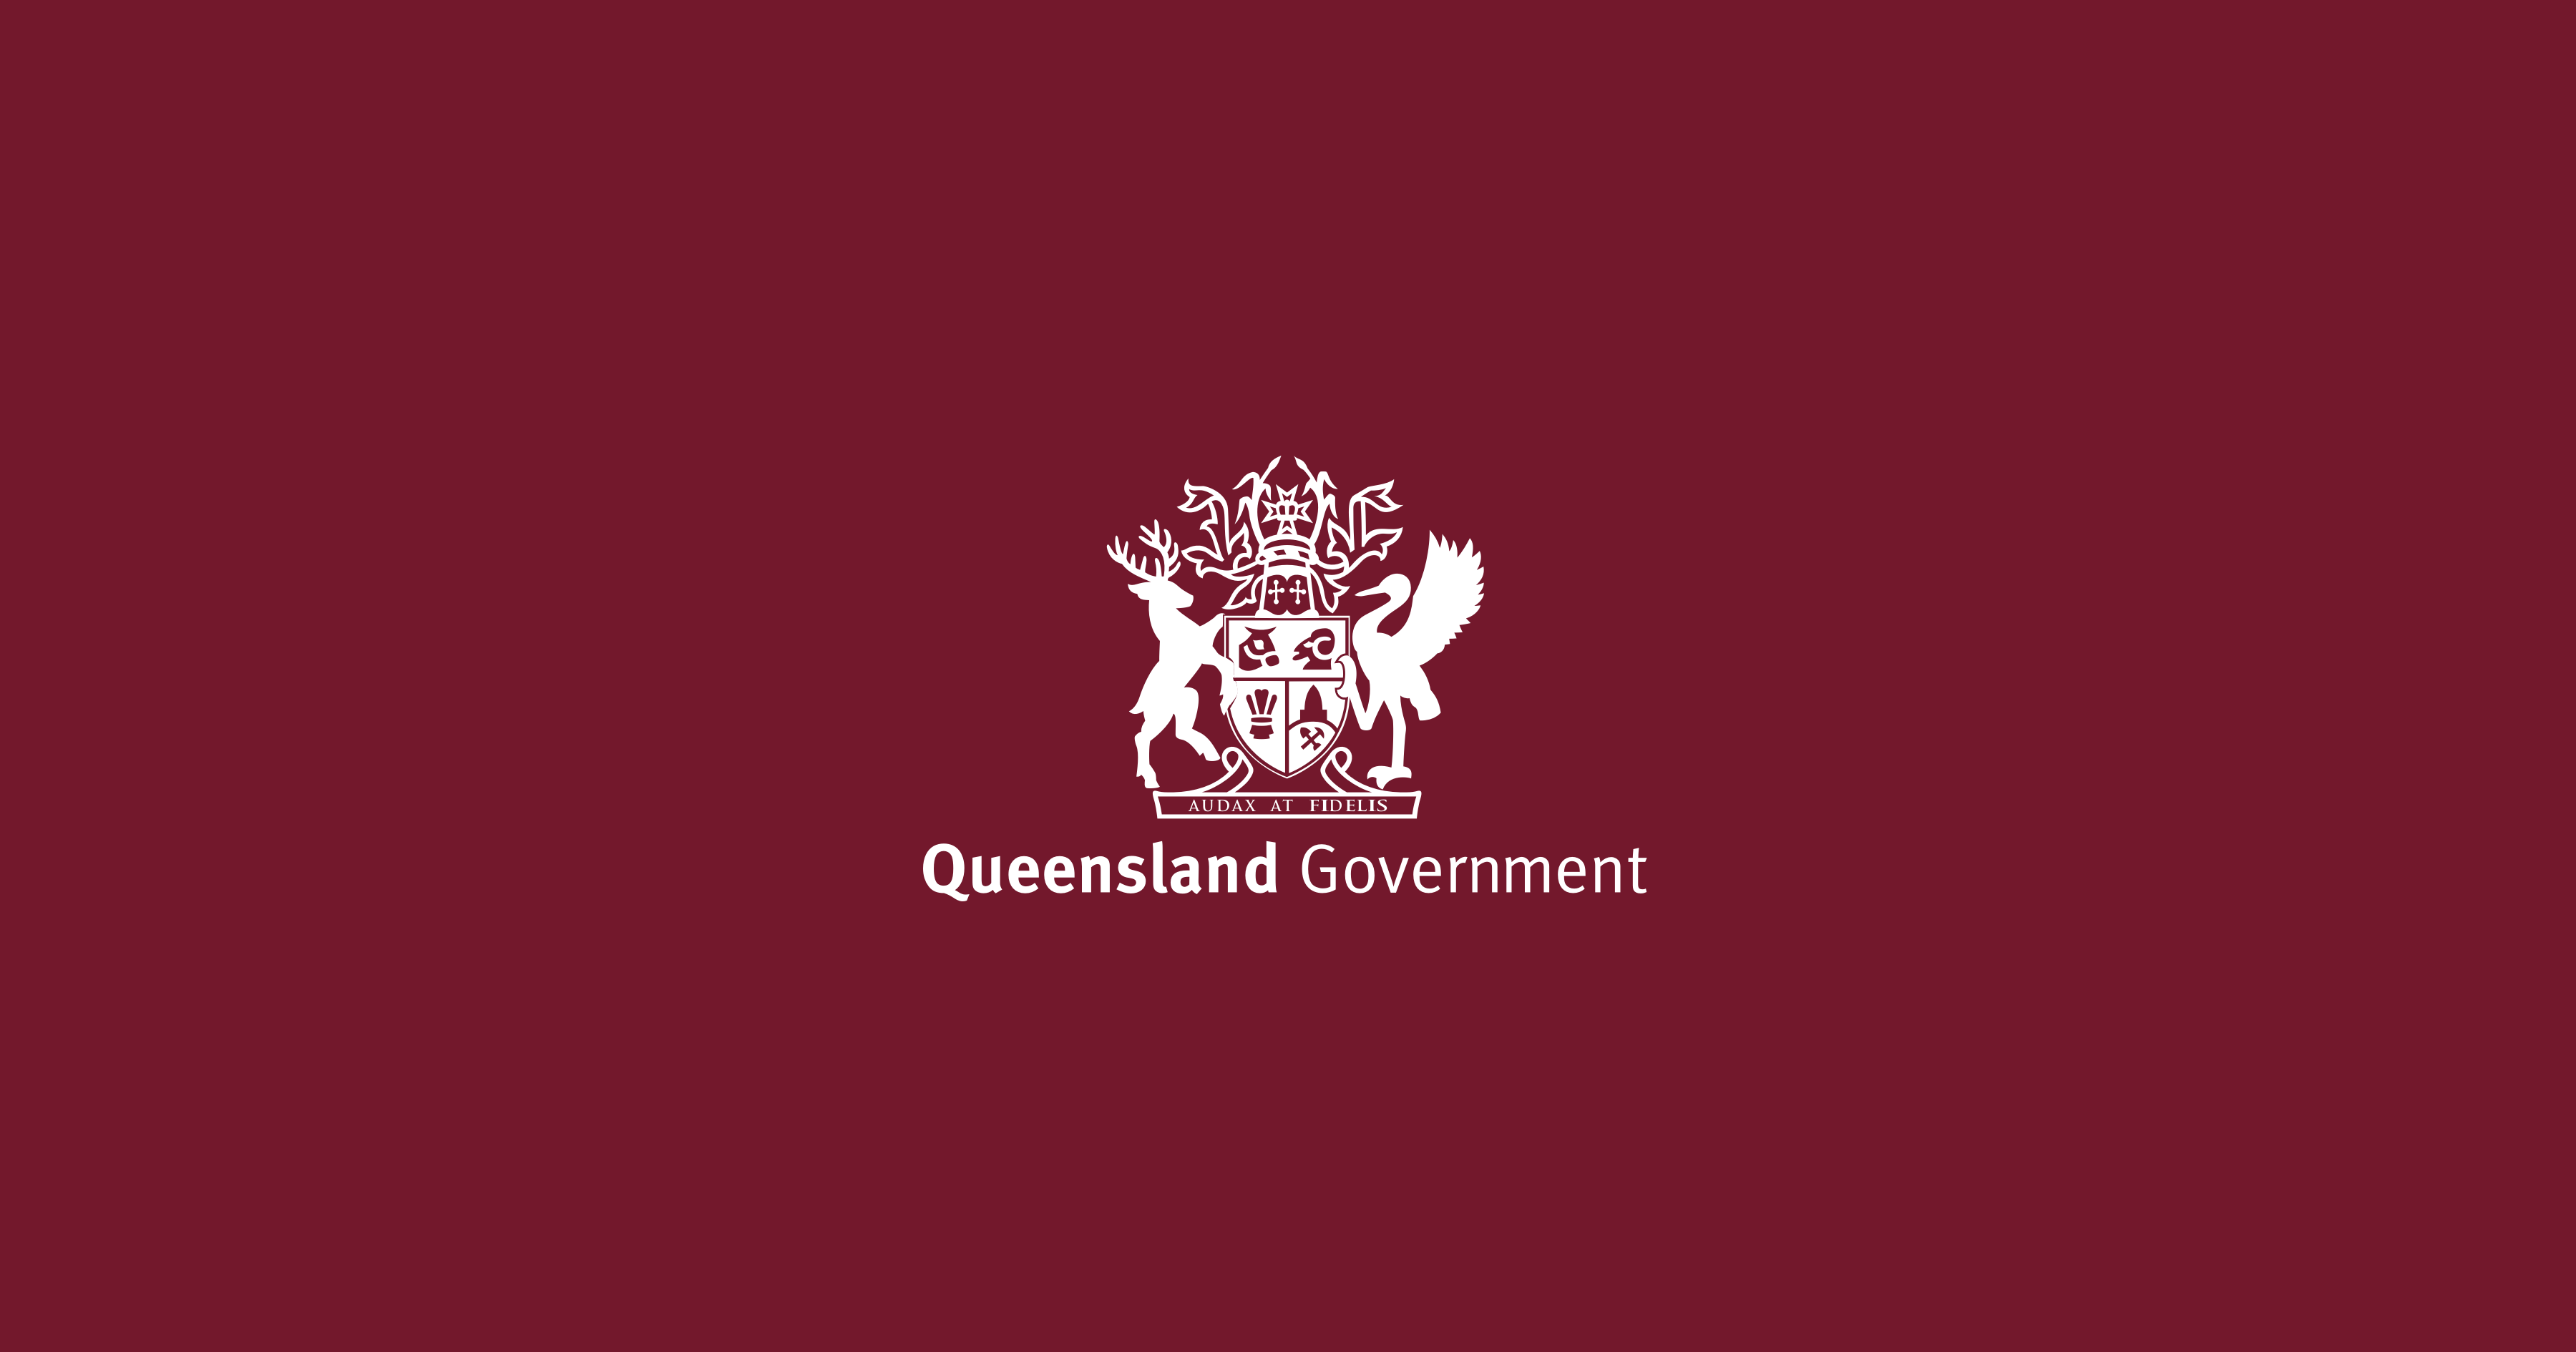 find-a-professional-network-community-support-queensland-government